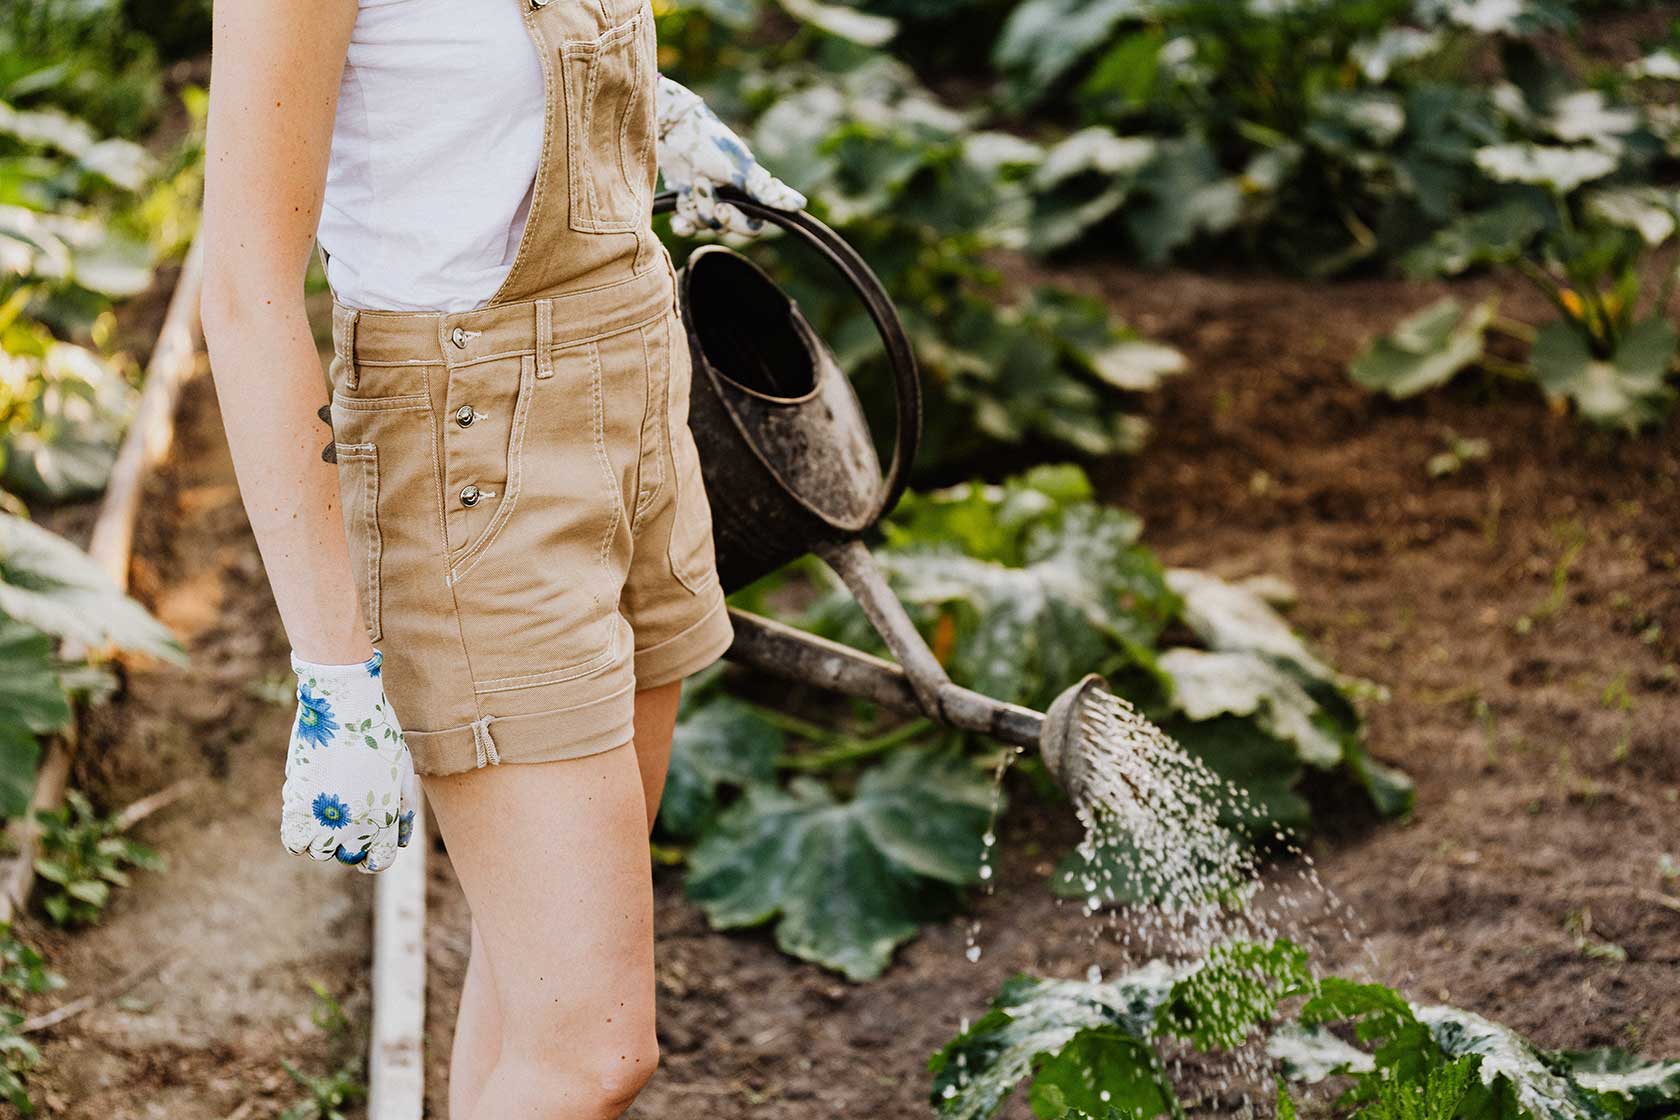 Reviving Your Garden: Tips For Drought Recovery